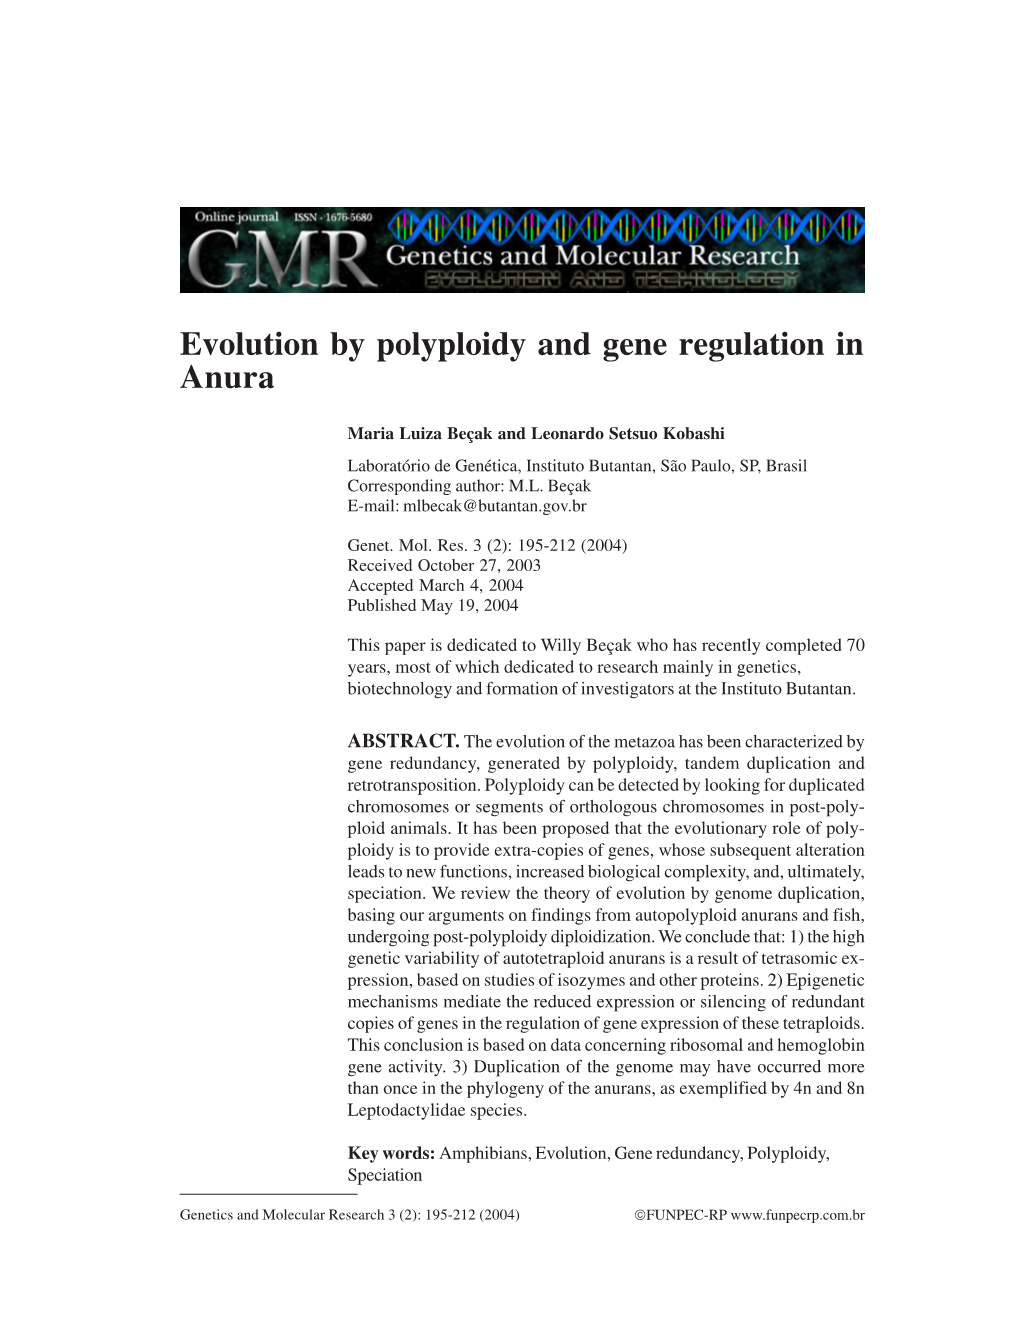 Evolution by Polyploidy and Gene Regulation in Anura 195